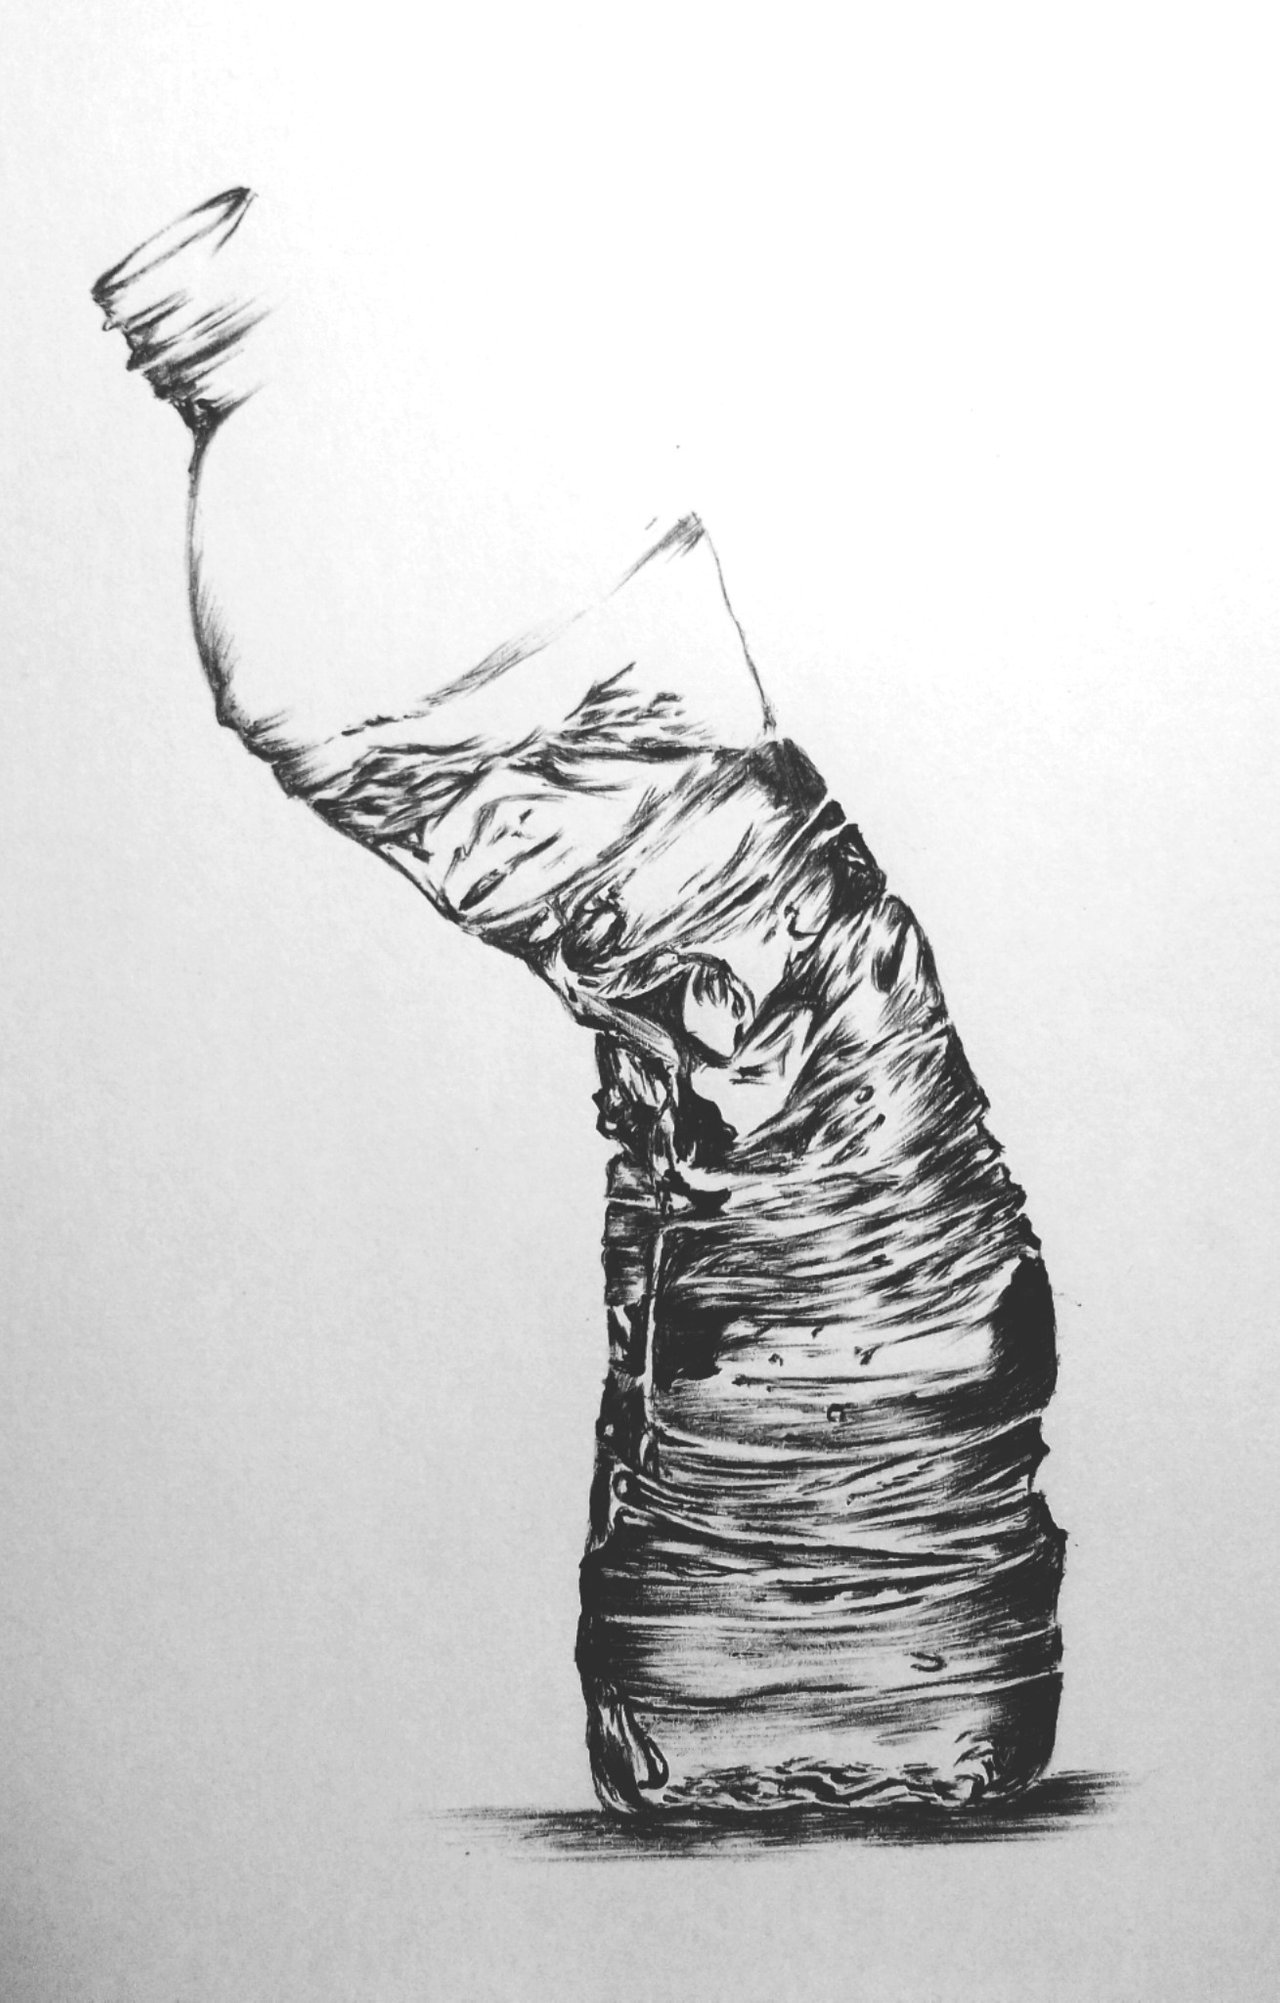 Plastic Bottle of Water  Freehand pencil sketch from life   Flickr